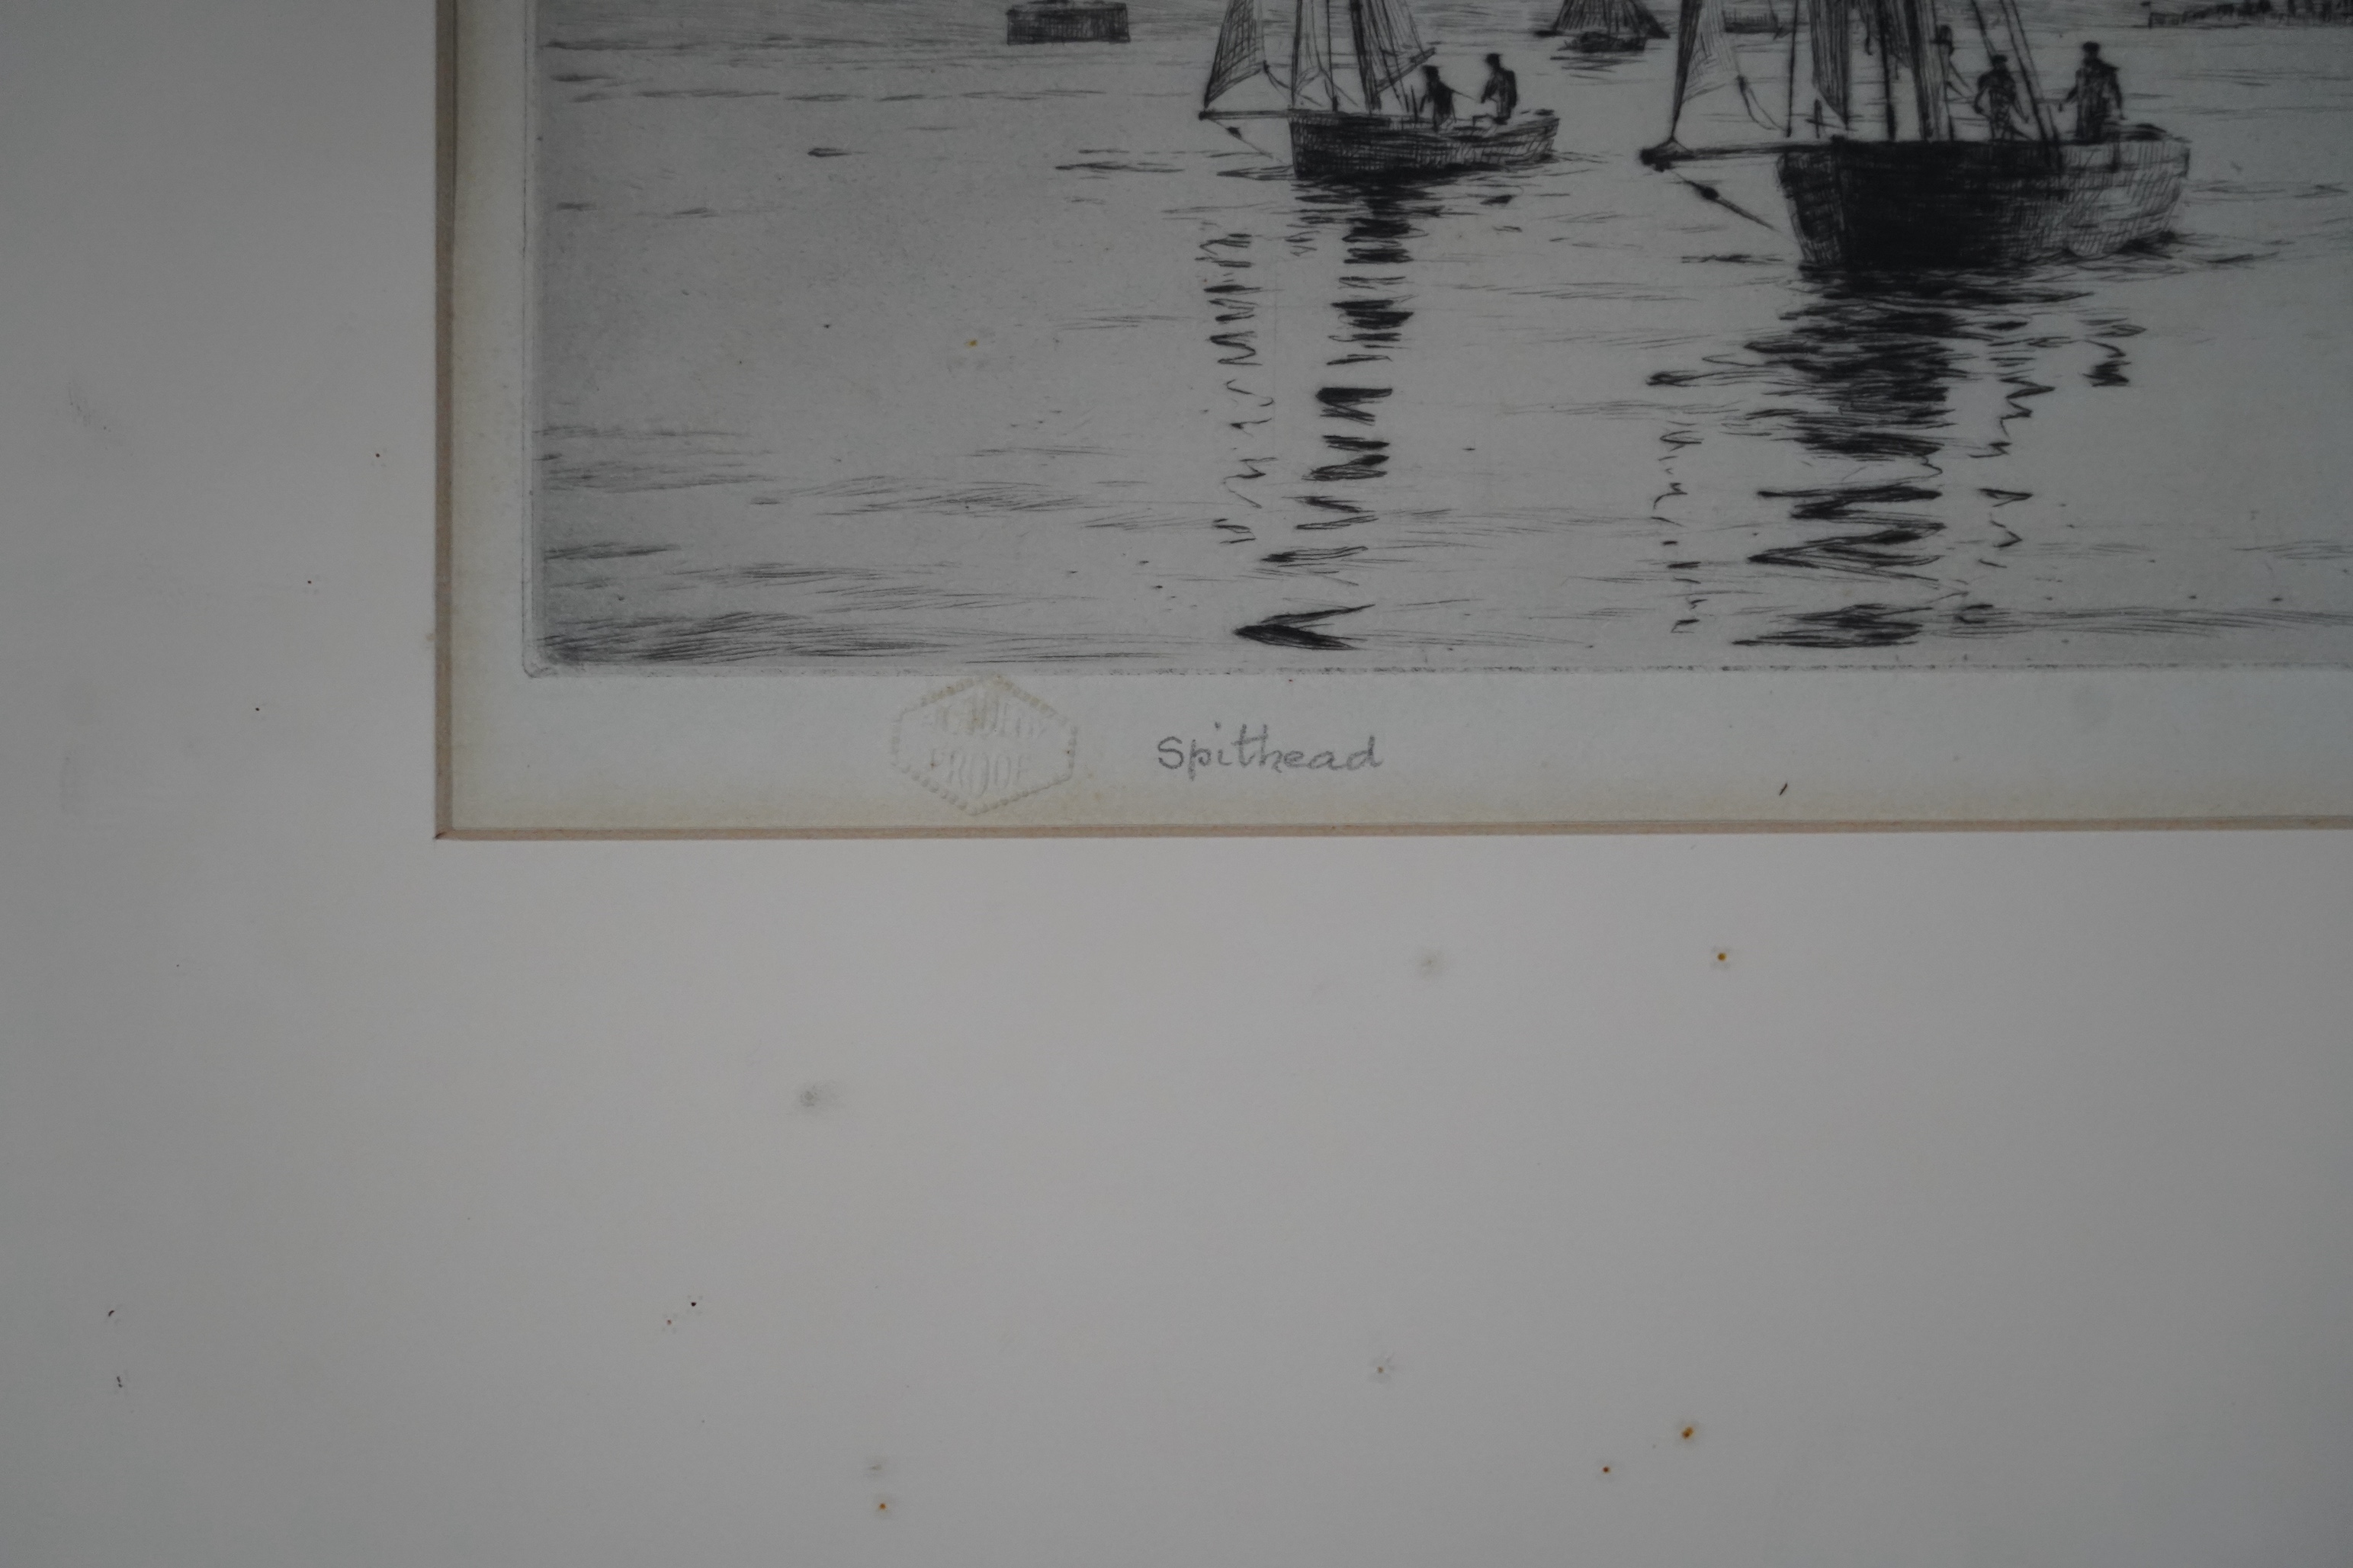 Rowland Langmaid (1897-1956), etching, 'Spithead', signed in pencil, academy proof blindstamped, 18 x 36cm